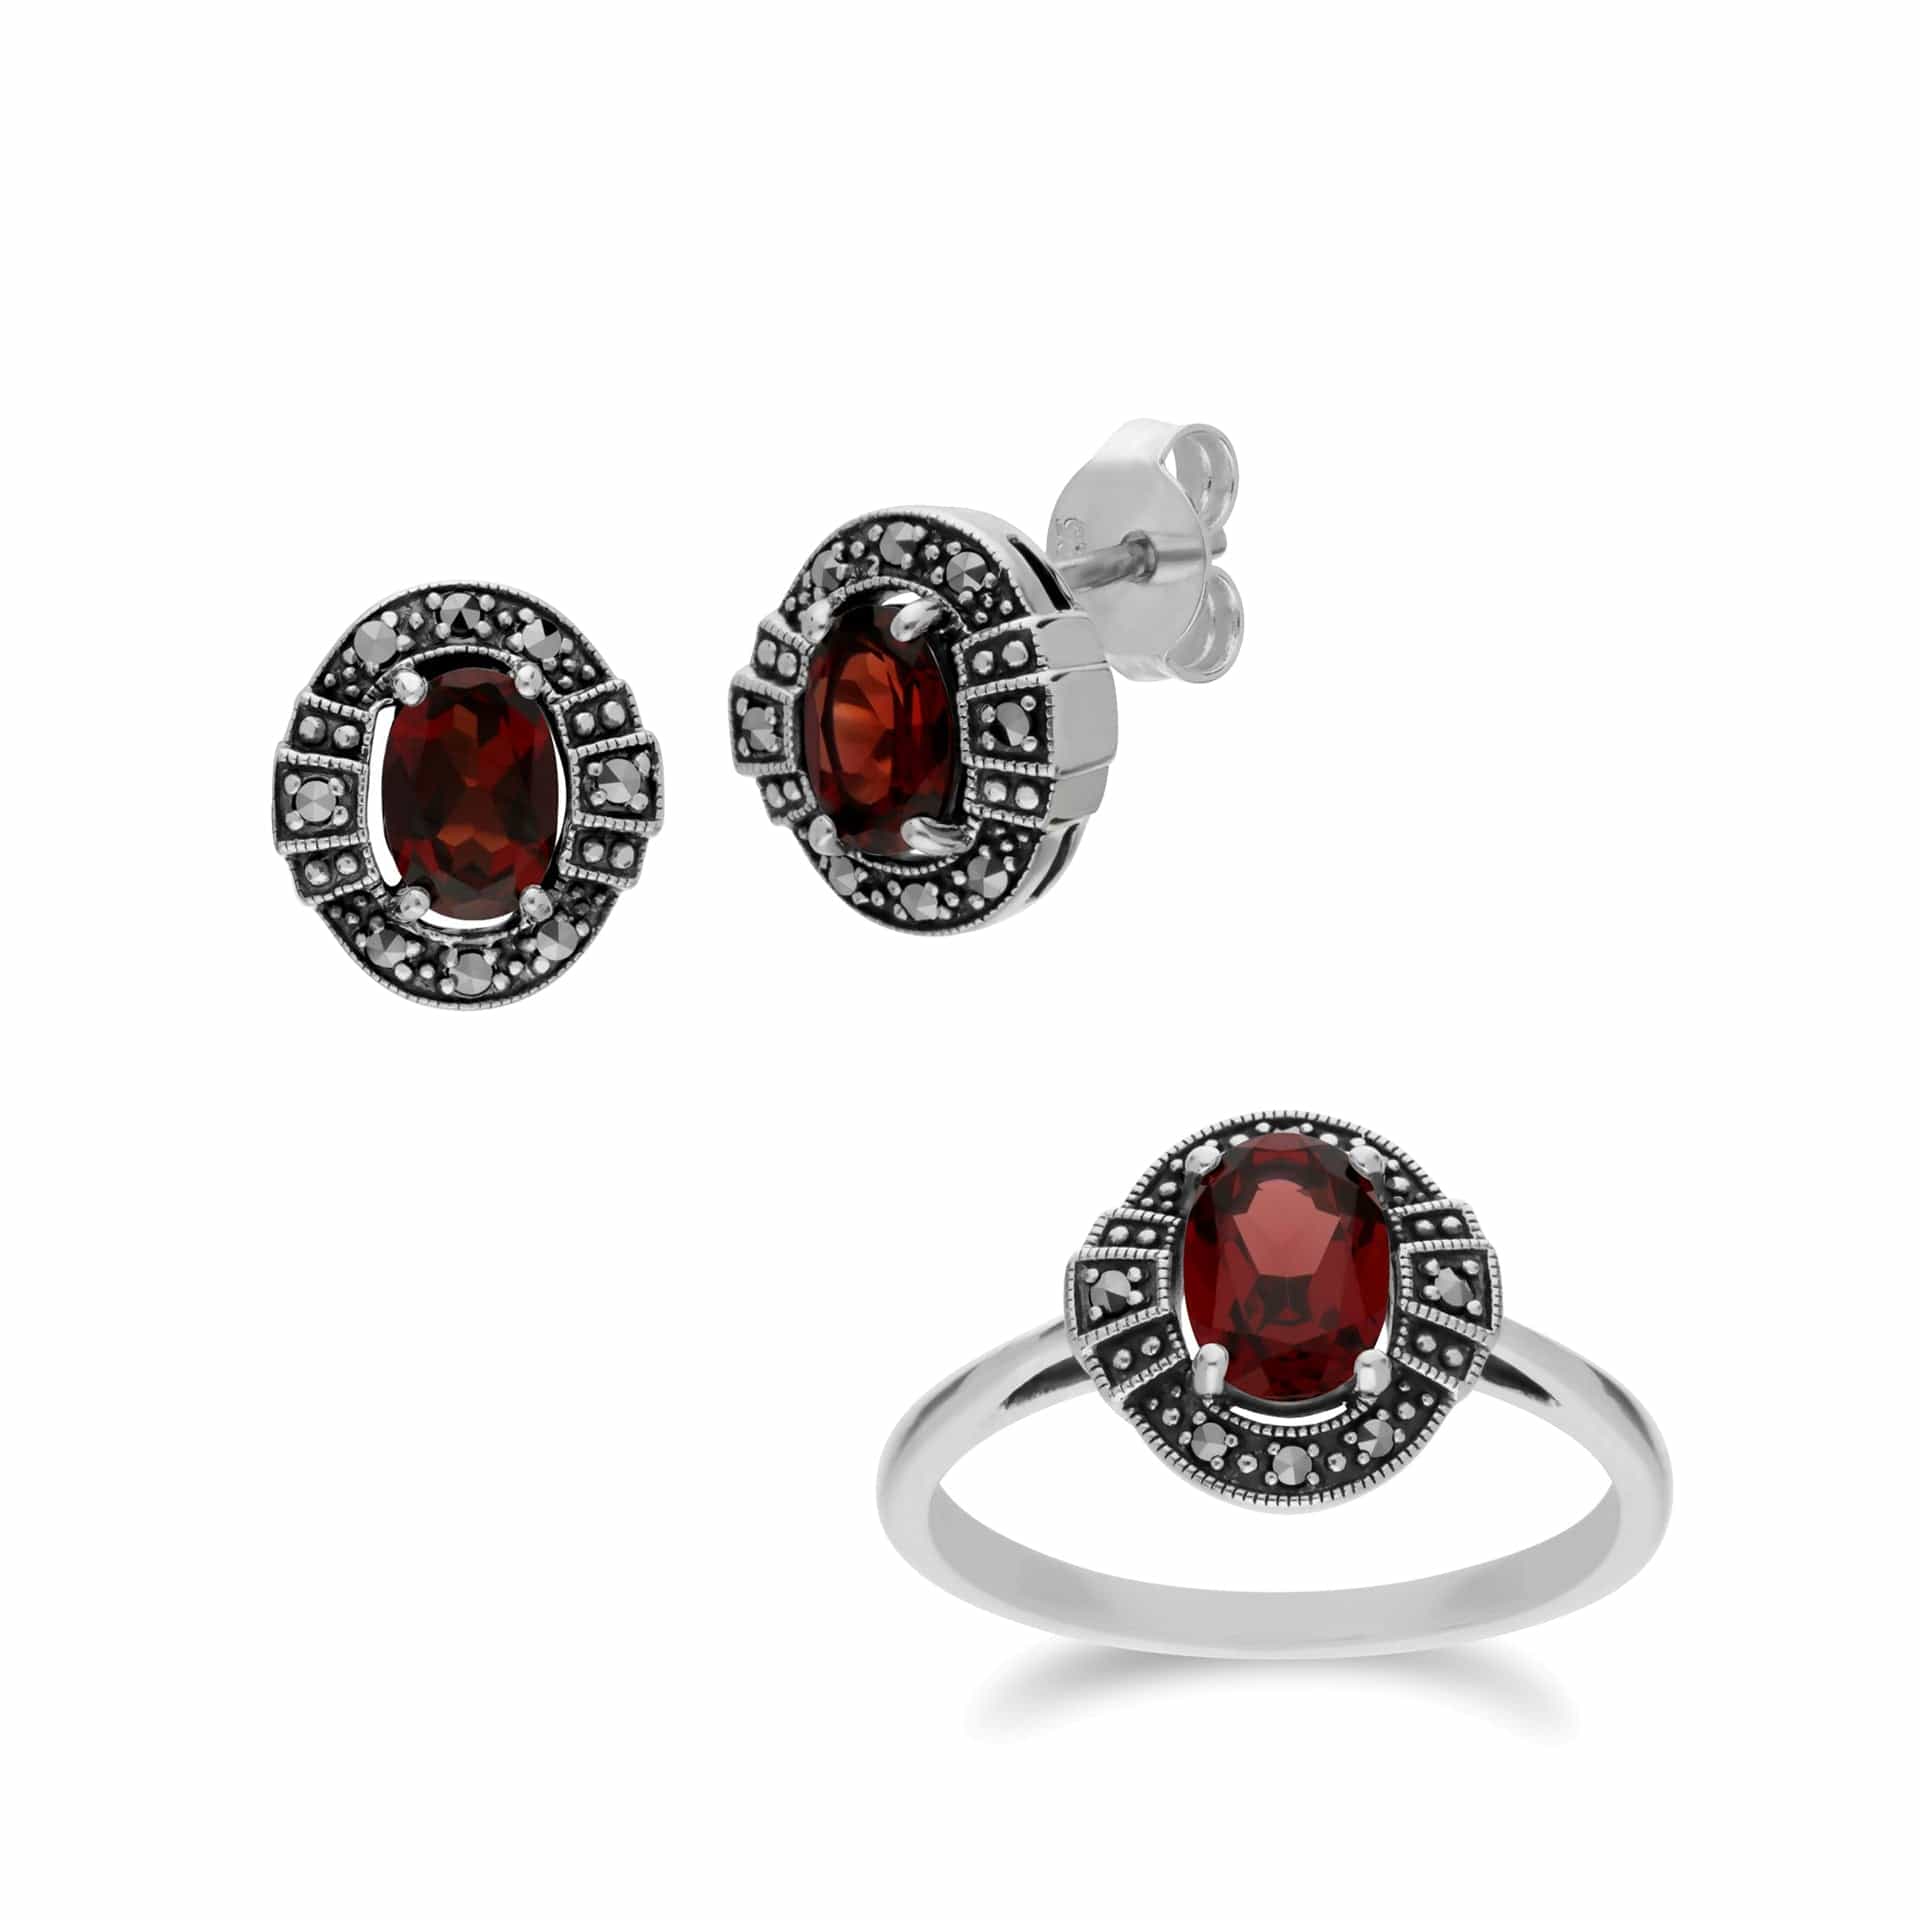 214E873003925-214R605703925 Art Deco Style Oval Garnet and Marcasite Cluster Stud Earrings & Ring Set in 925 Sterling Silver 1